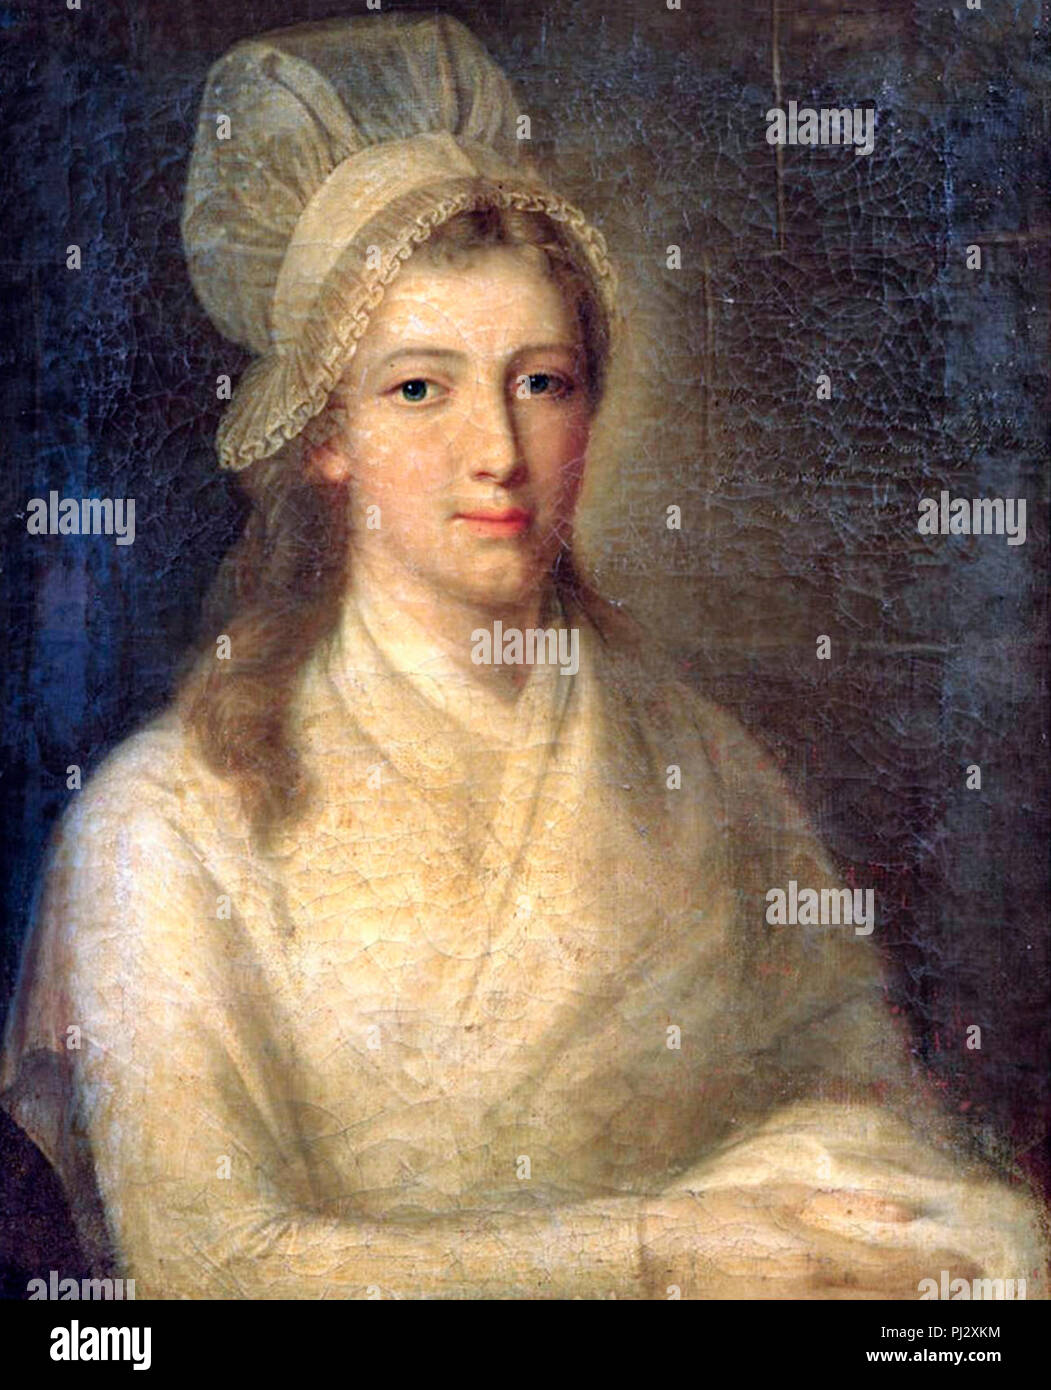 Portrait of Charlotte Corday - Jean-Jacques Hauer Stock Photo